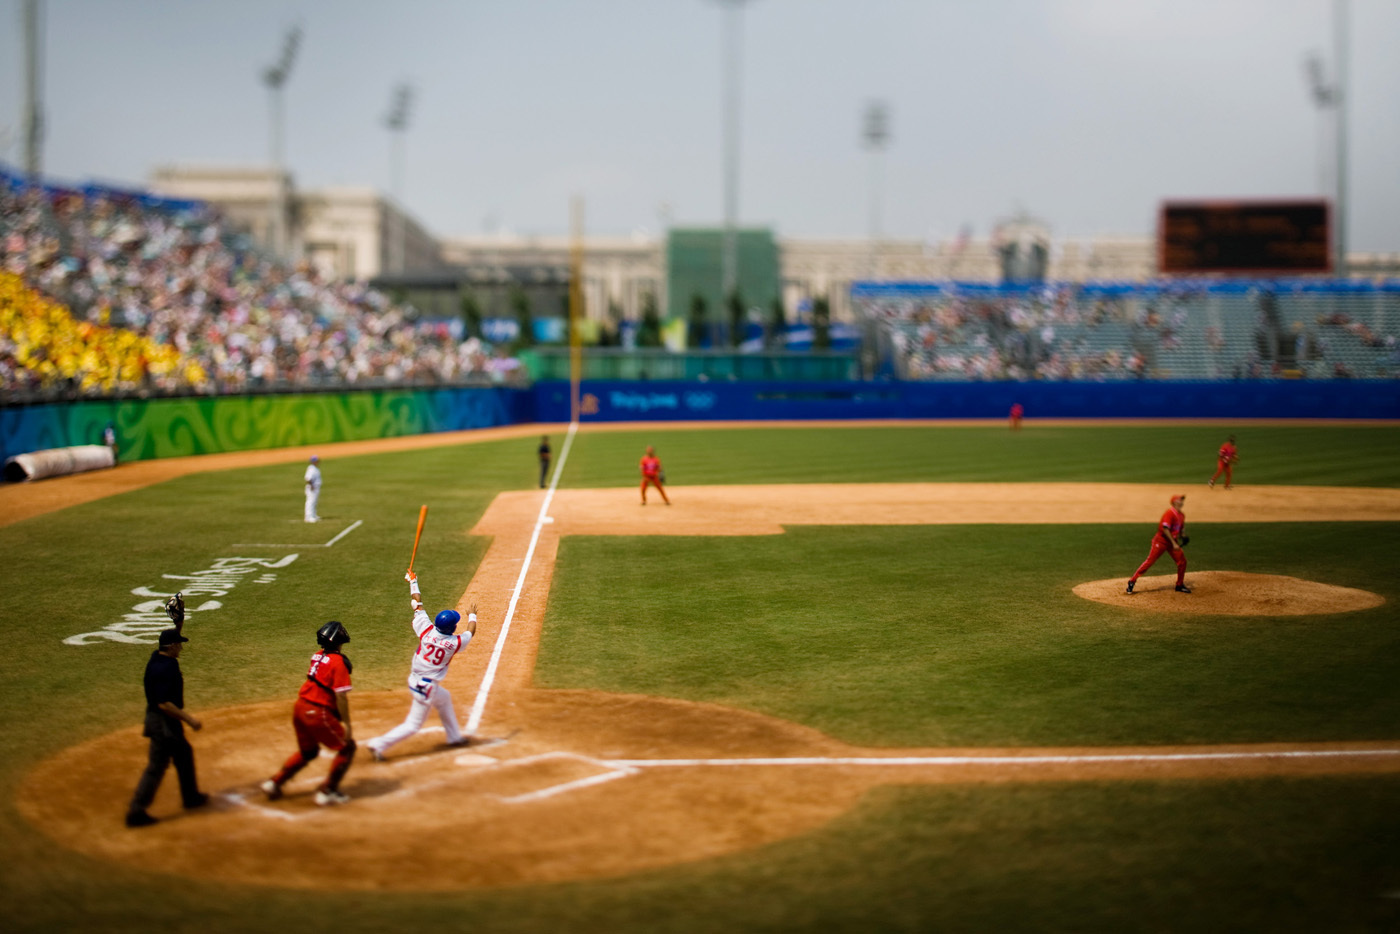 Olympic Baseball: the last year as an Olympic event